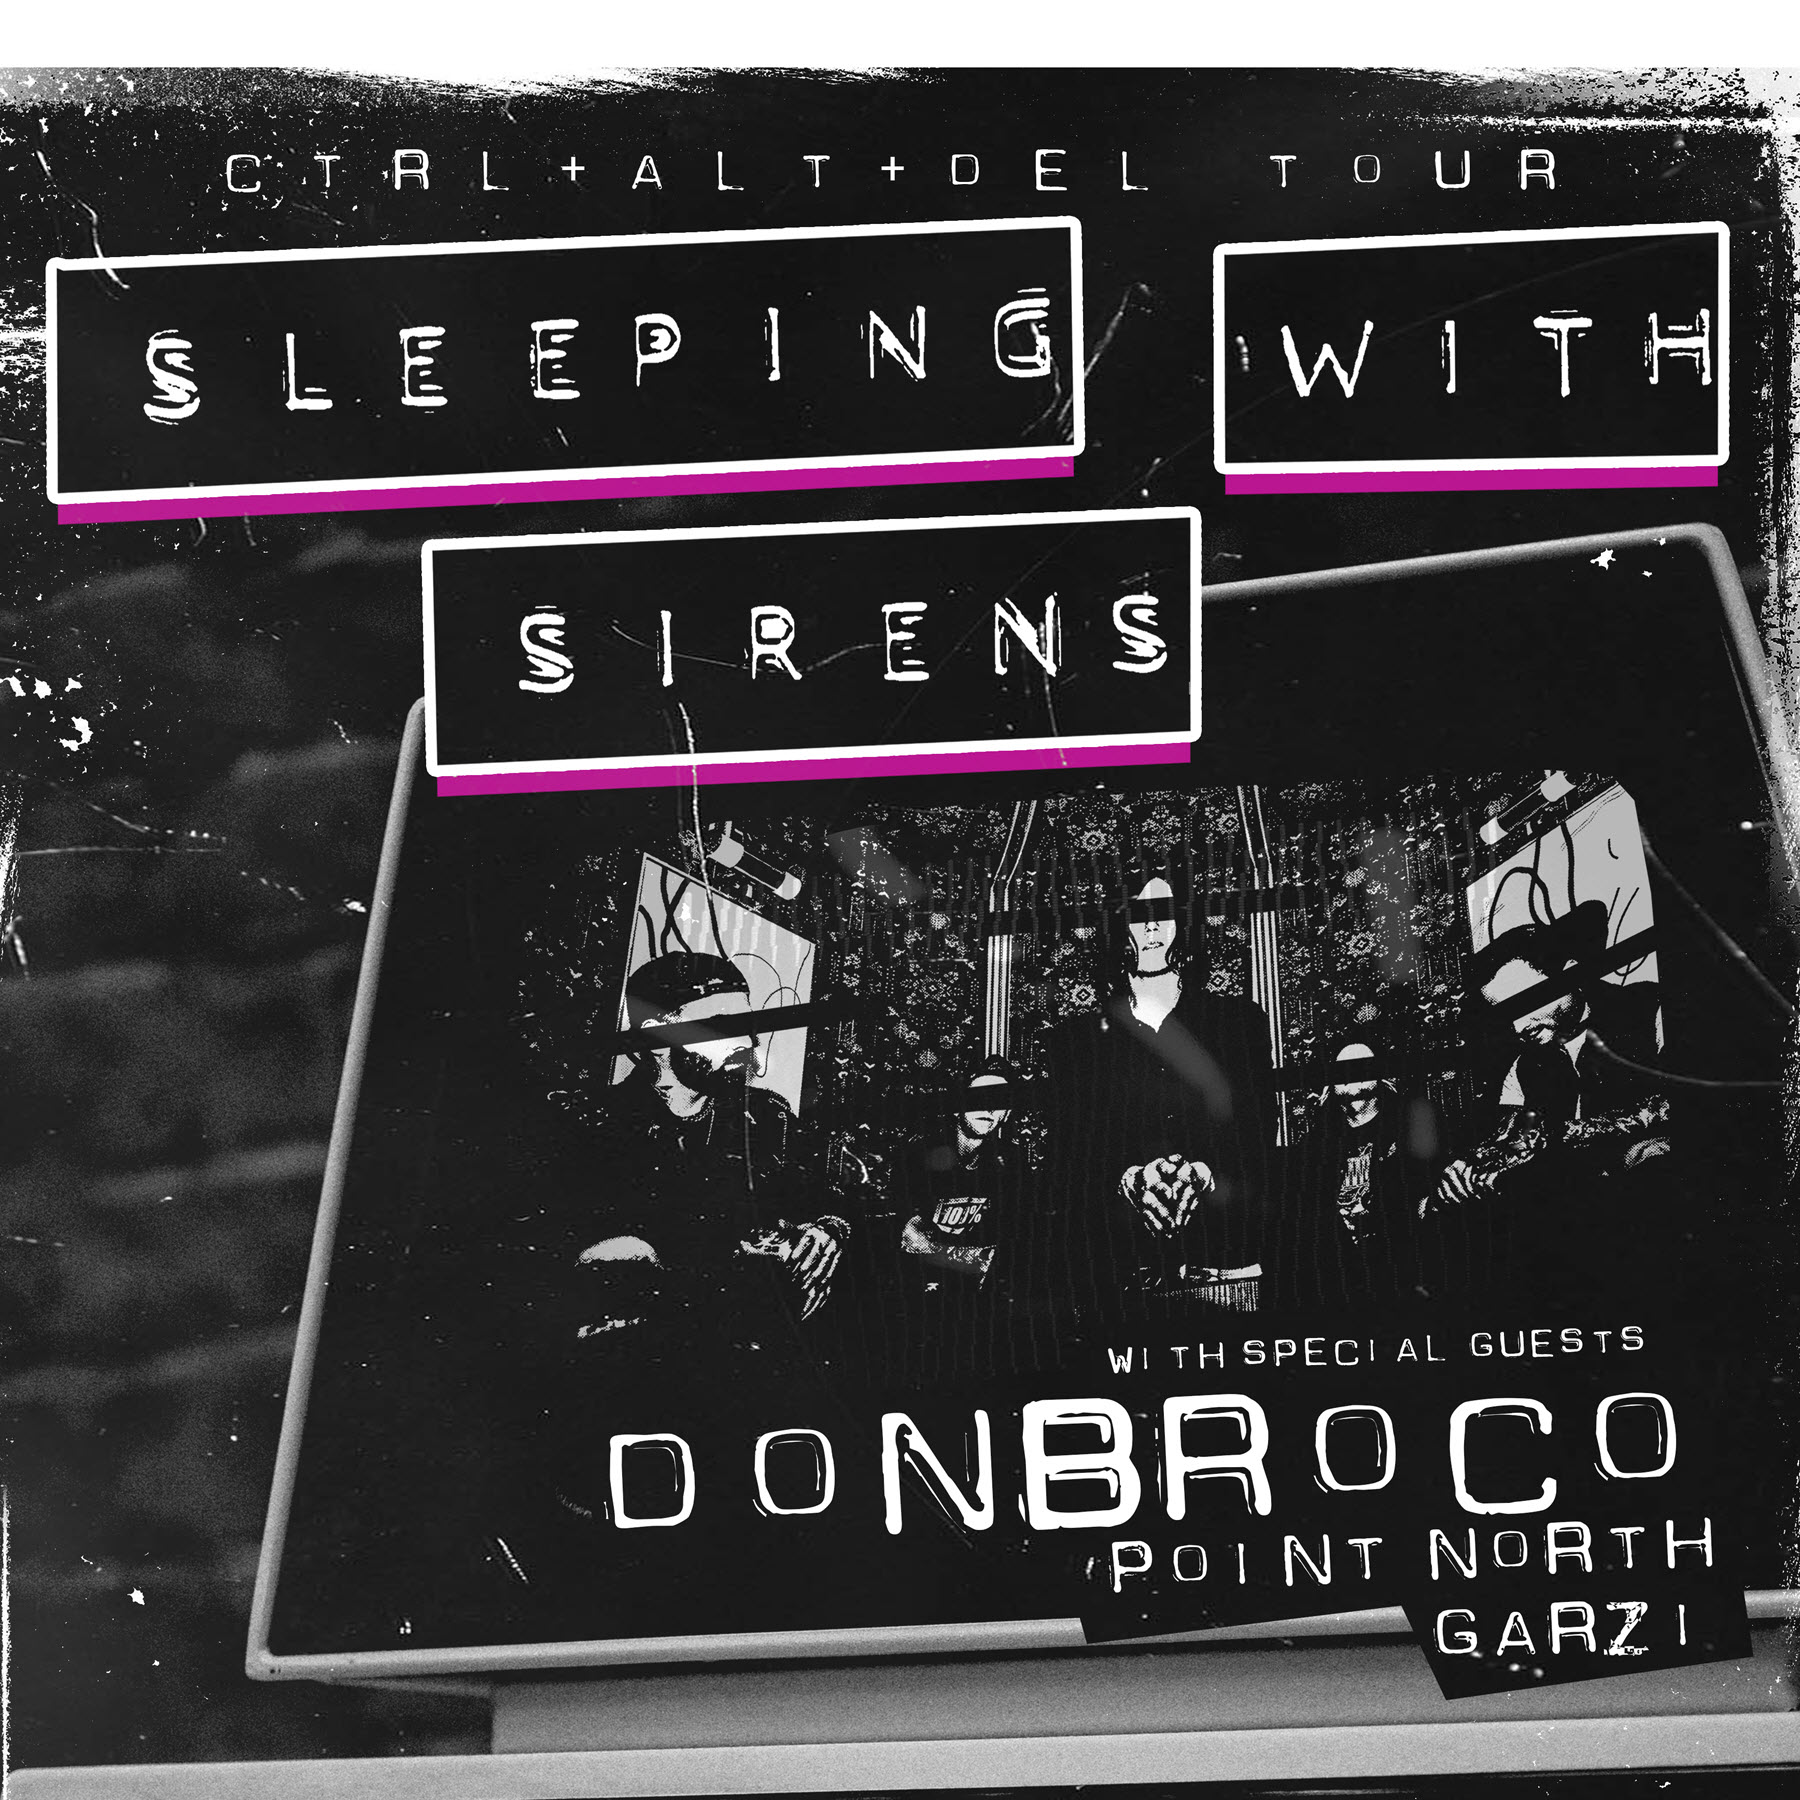 SLEEPING WITH SIRENS : CTRL + ALT+ DEL TOUR with Don Broco, Point North, Garzi